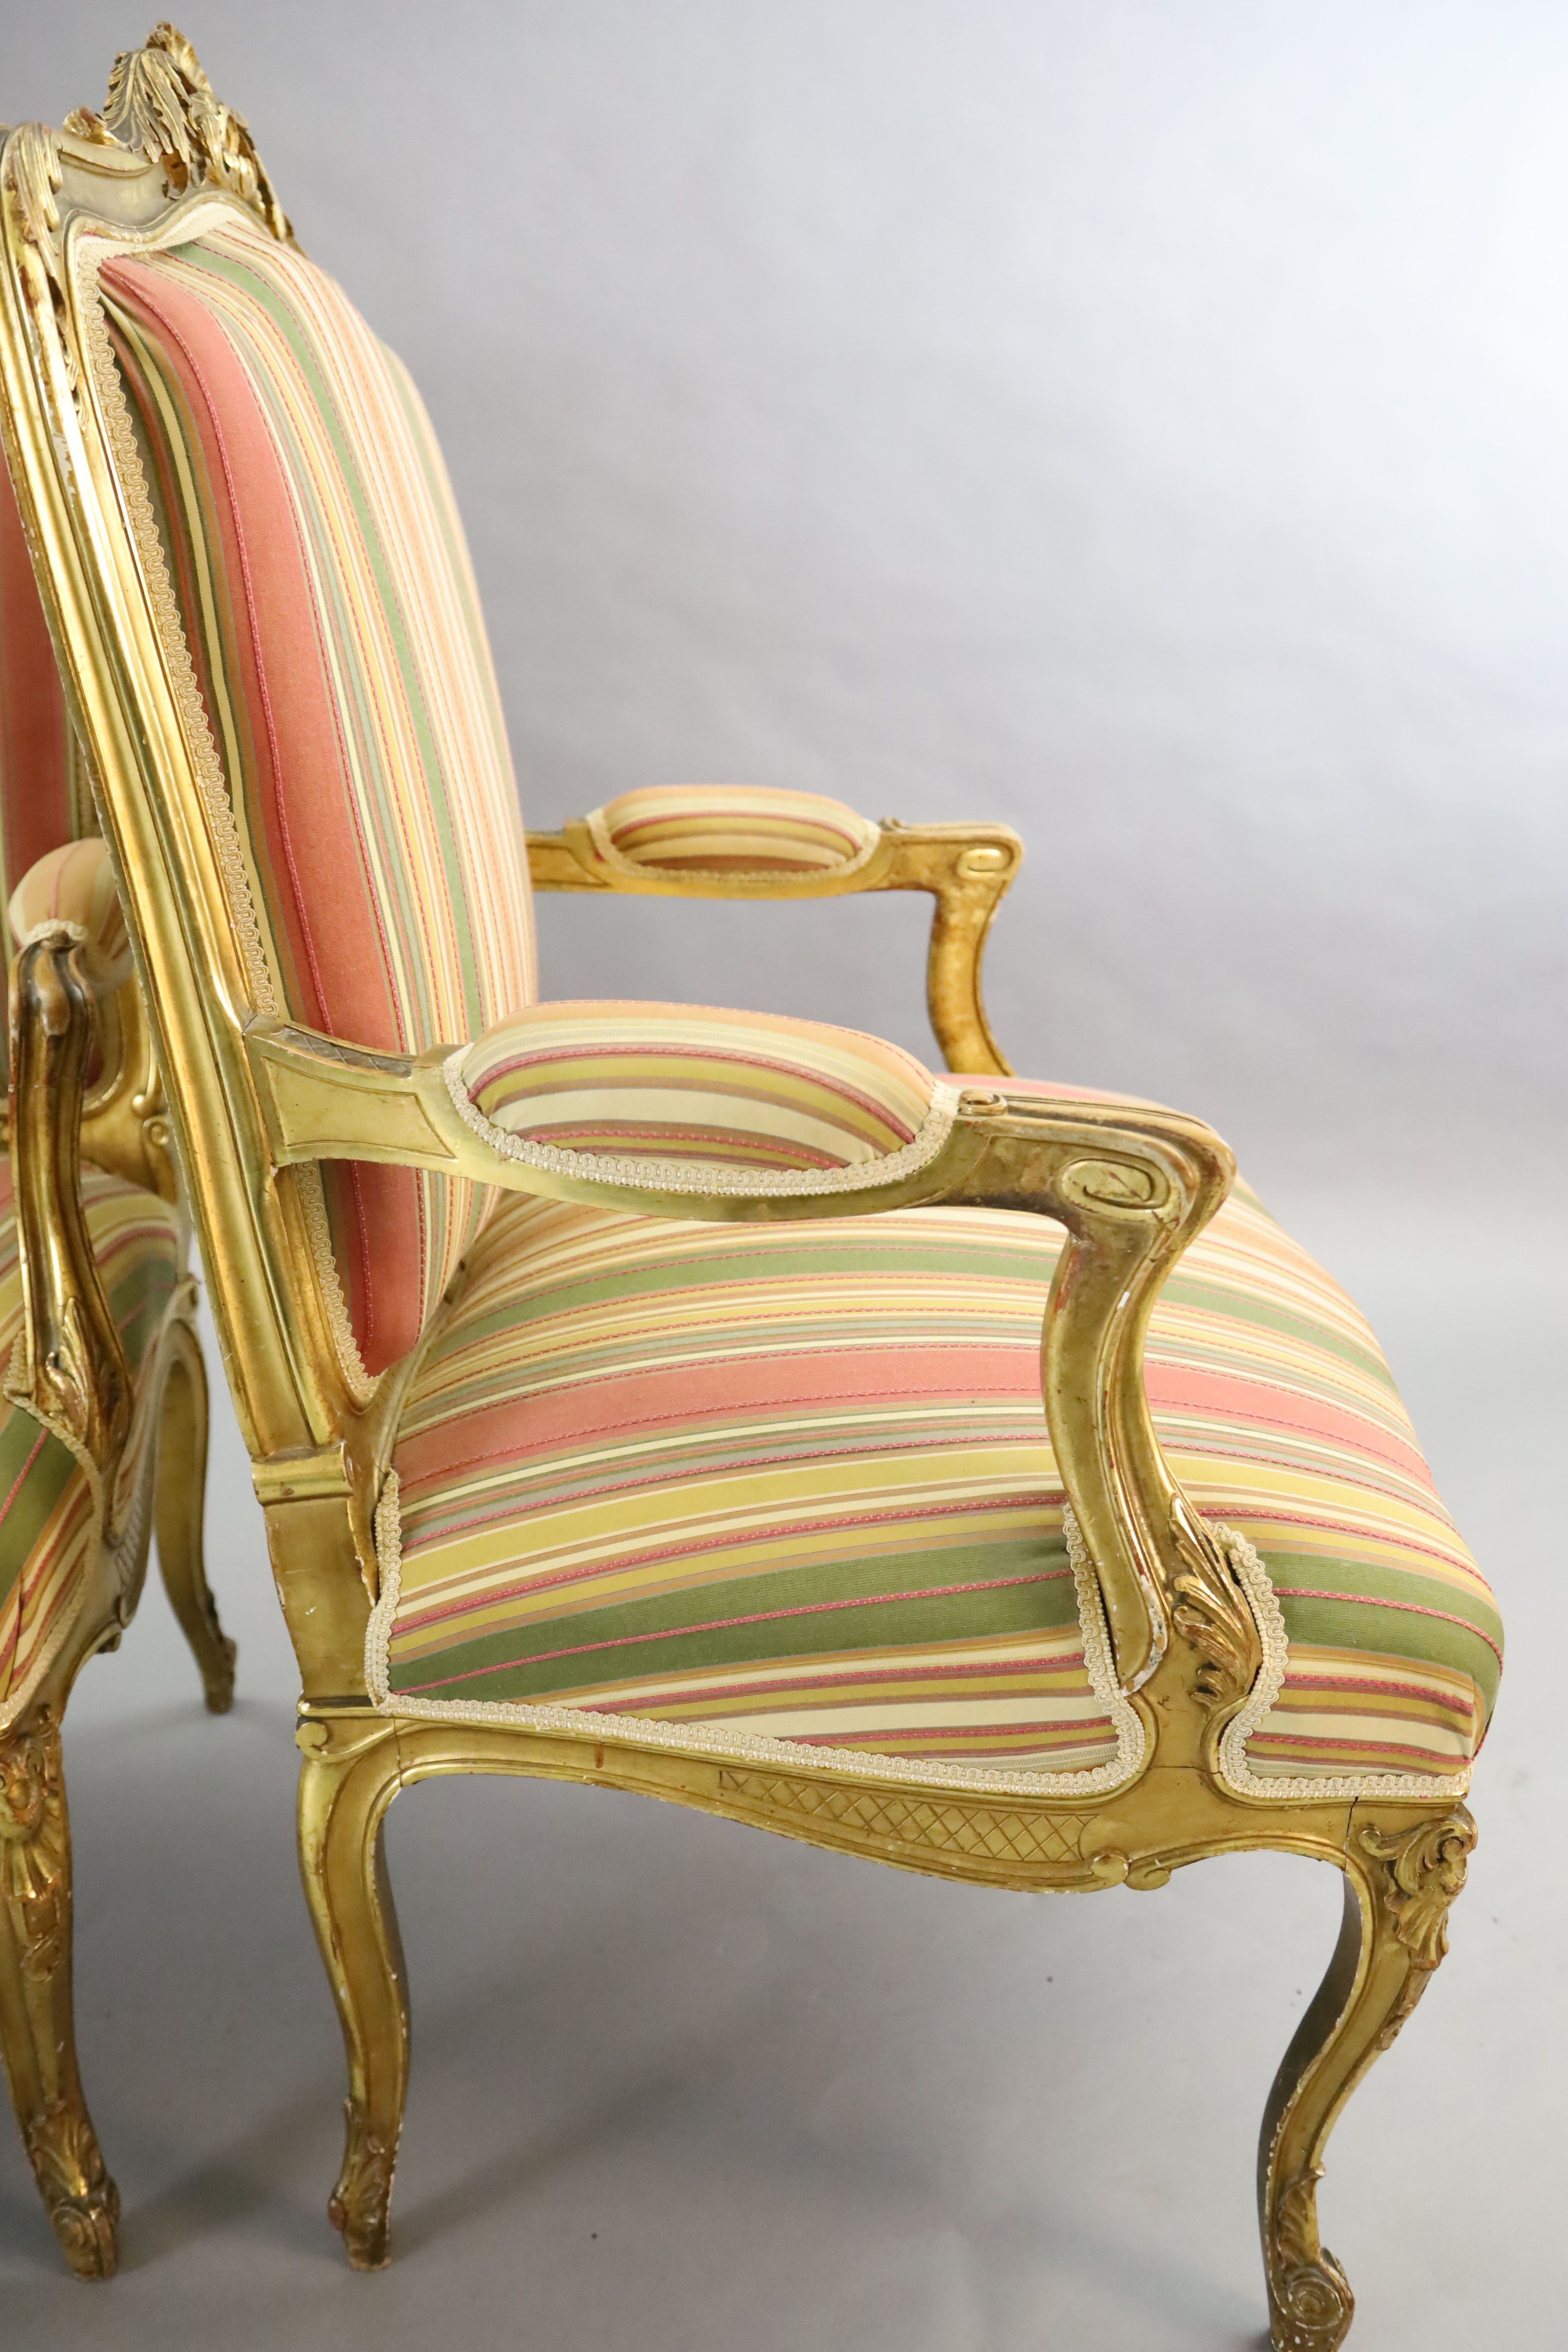 A pair of French gilt beech fauteuils, W.2ft 3in. D.2ft 1in. H.3ft 5in.